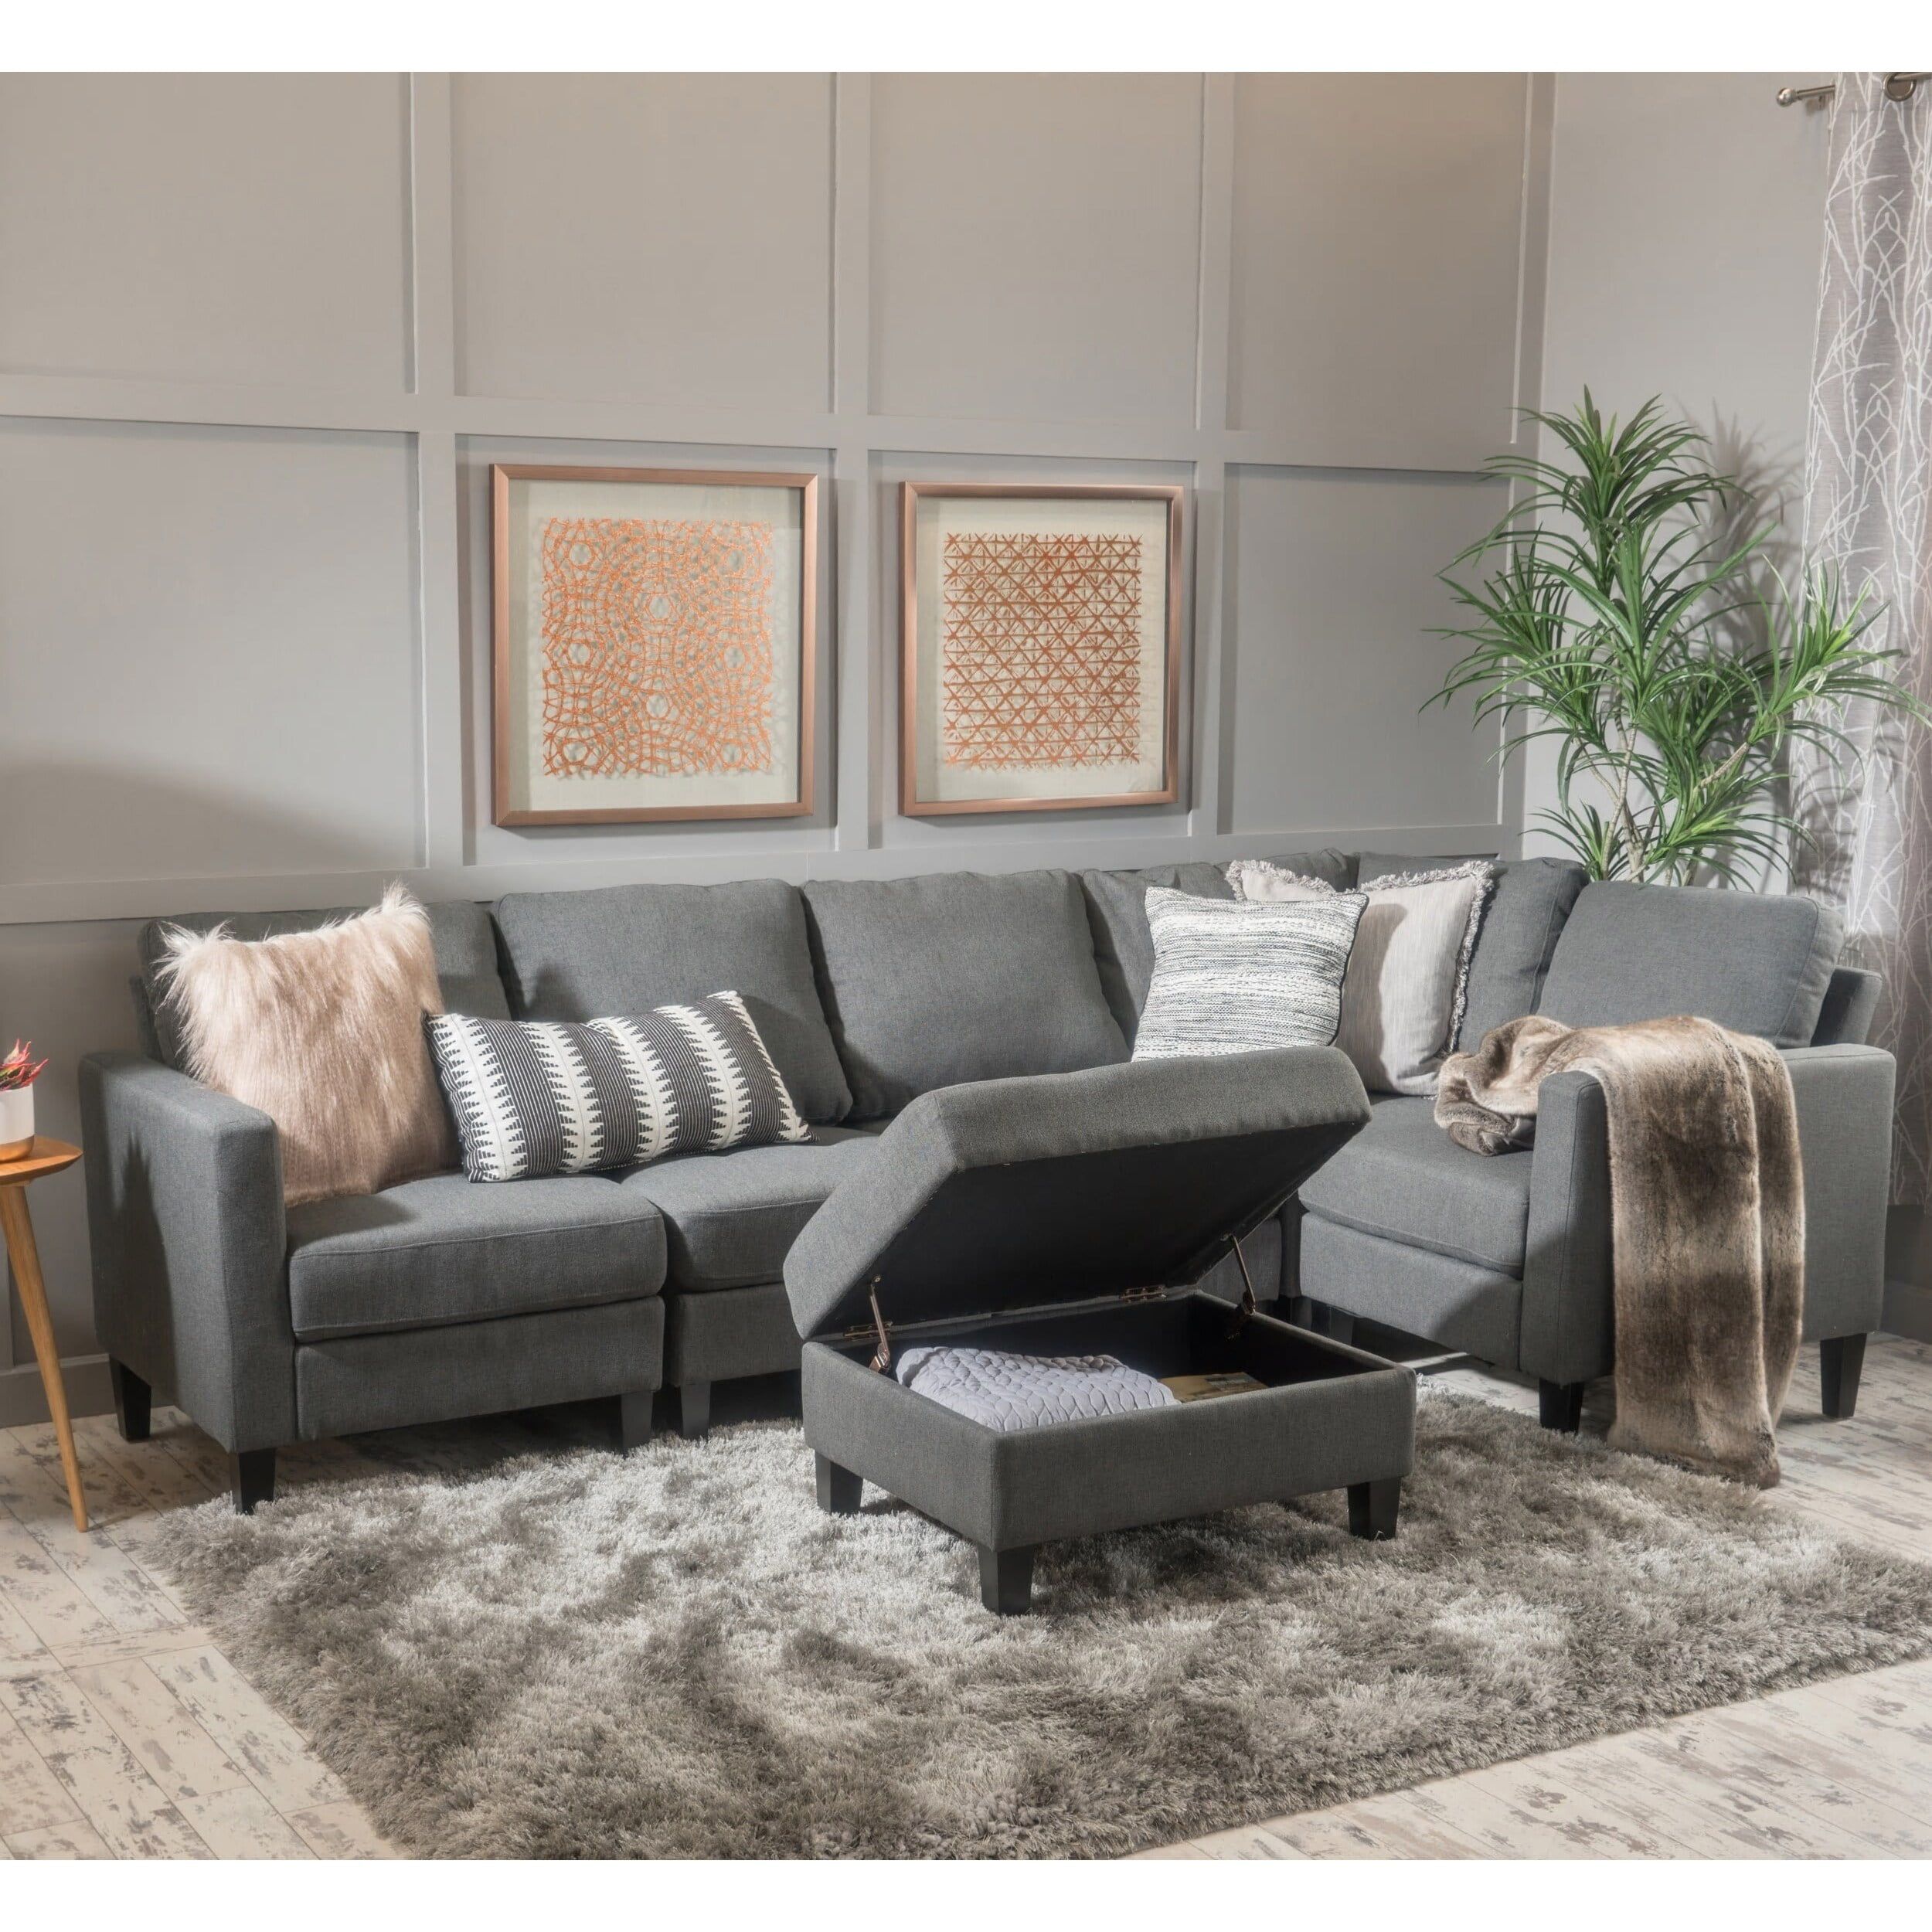 Christopher Knight Home Zahra 6 Piece Sofa Sectional With Storage With Regard To Sofas With Ottomans (Gallery 8 of 20)